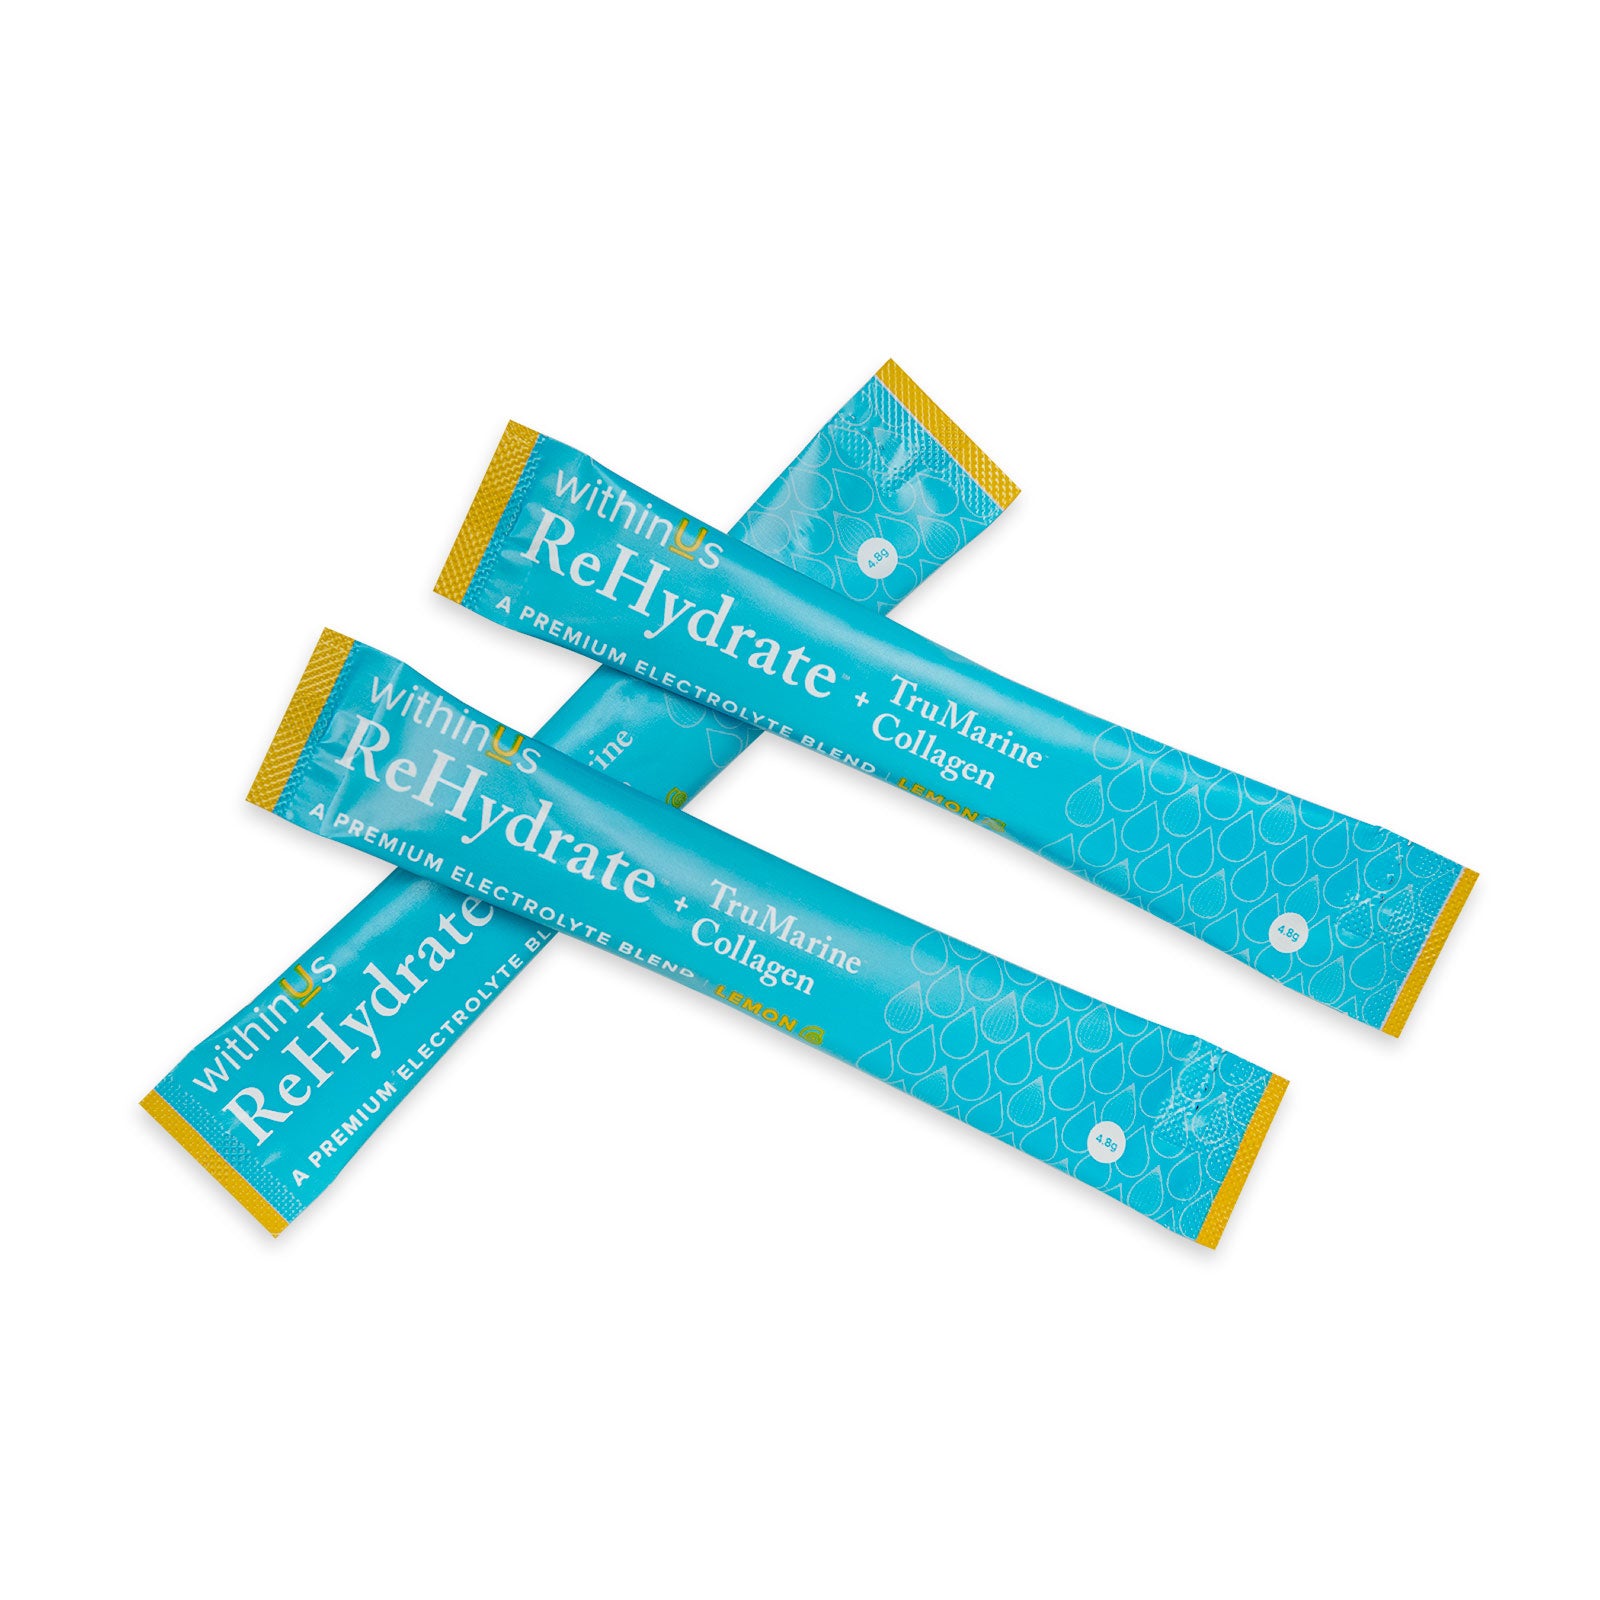 A photo of 3 withinUs ReHydrate + Collagen stick packs